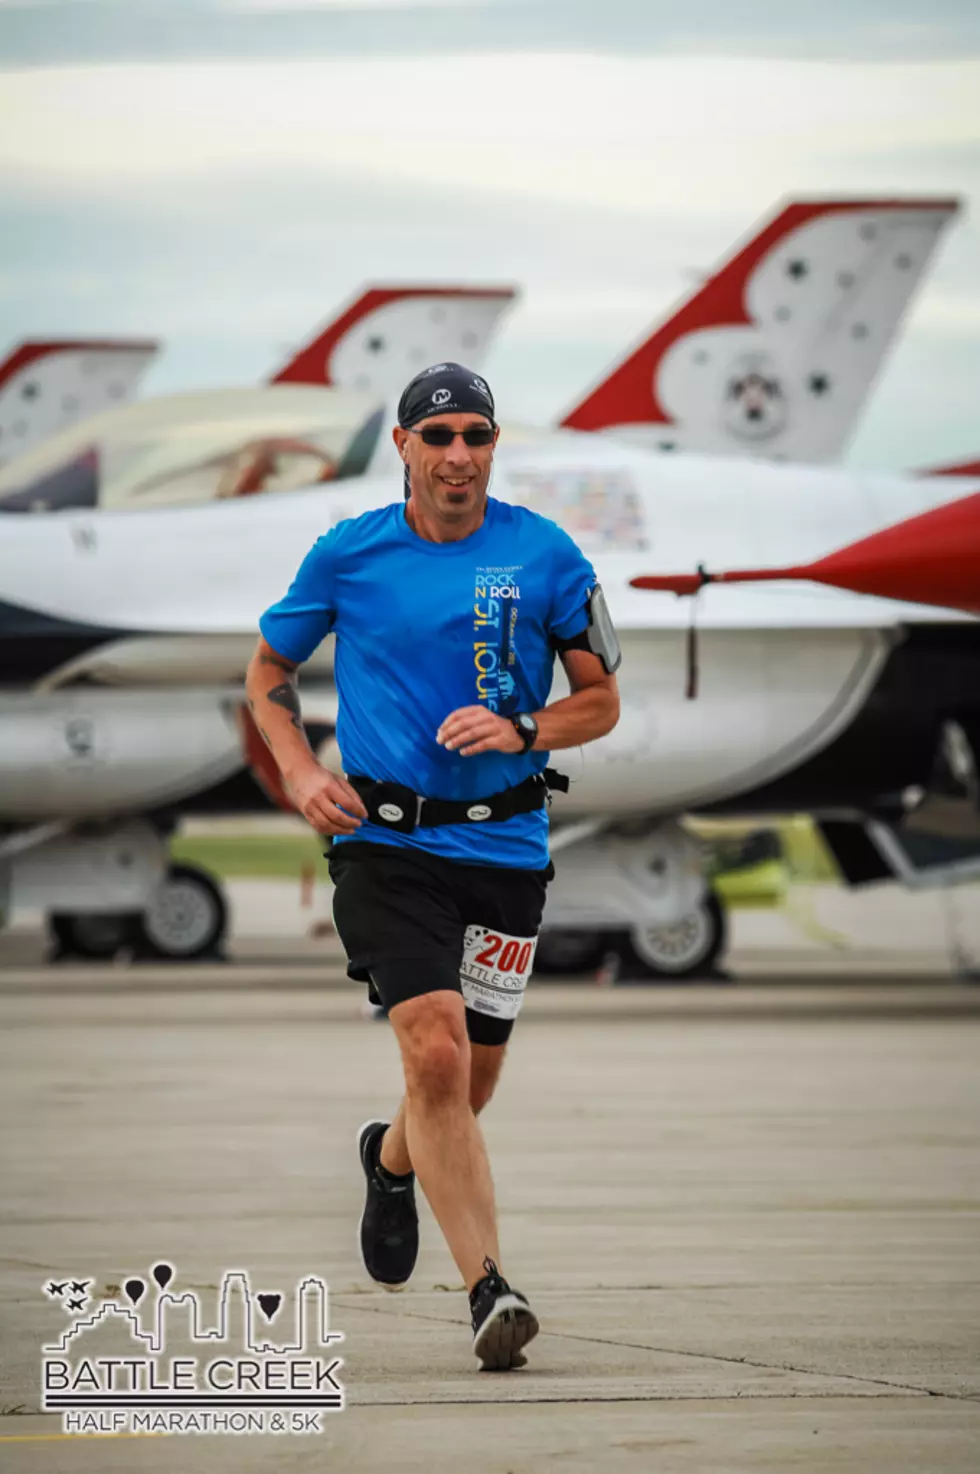 Inaugural Battle Creek 1/2 Marathon Gives Runners a Close-Up View of the Incredible U.S.A.F. Thinderbirds